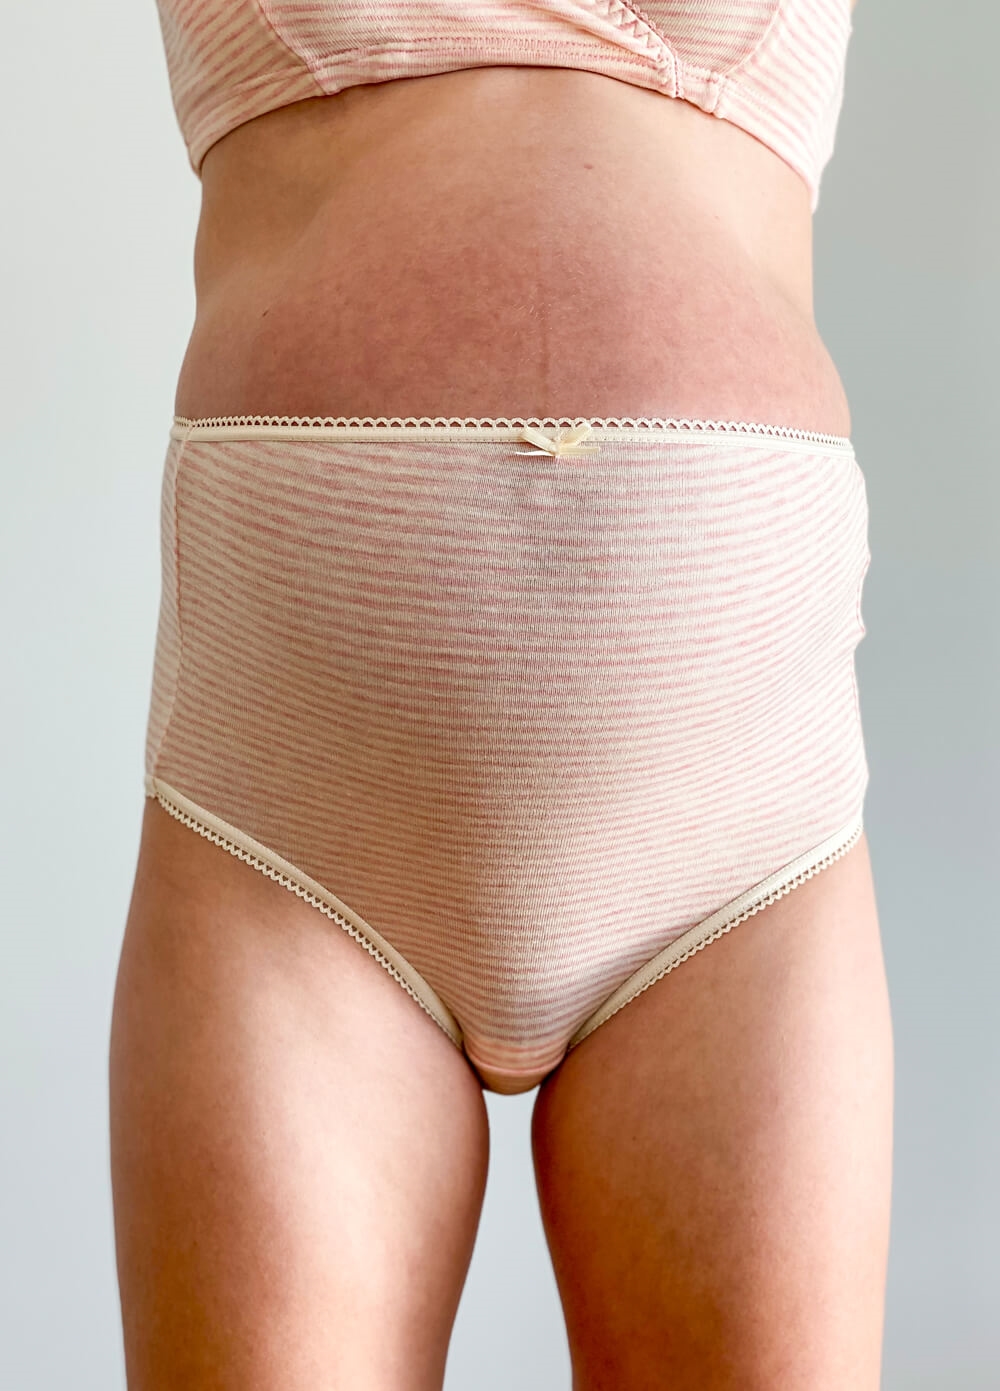 QueenBee® - Evelina 3-pack Maternity Briefs in Pink Stripes